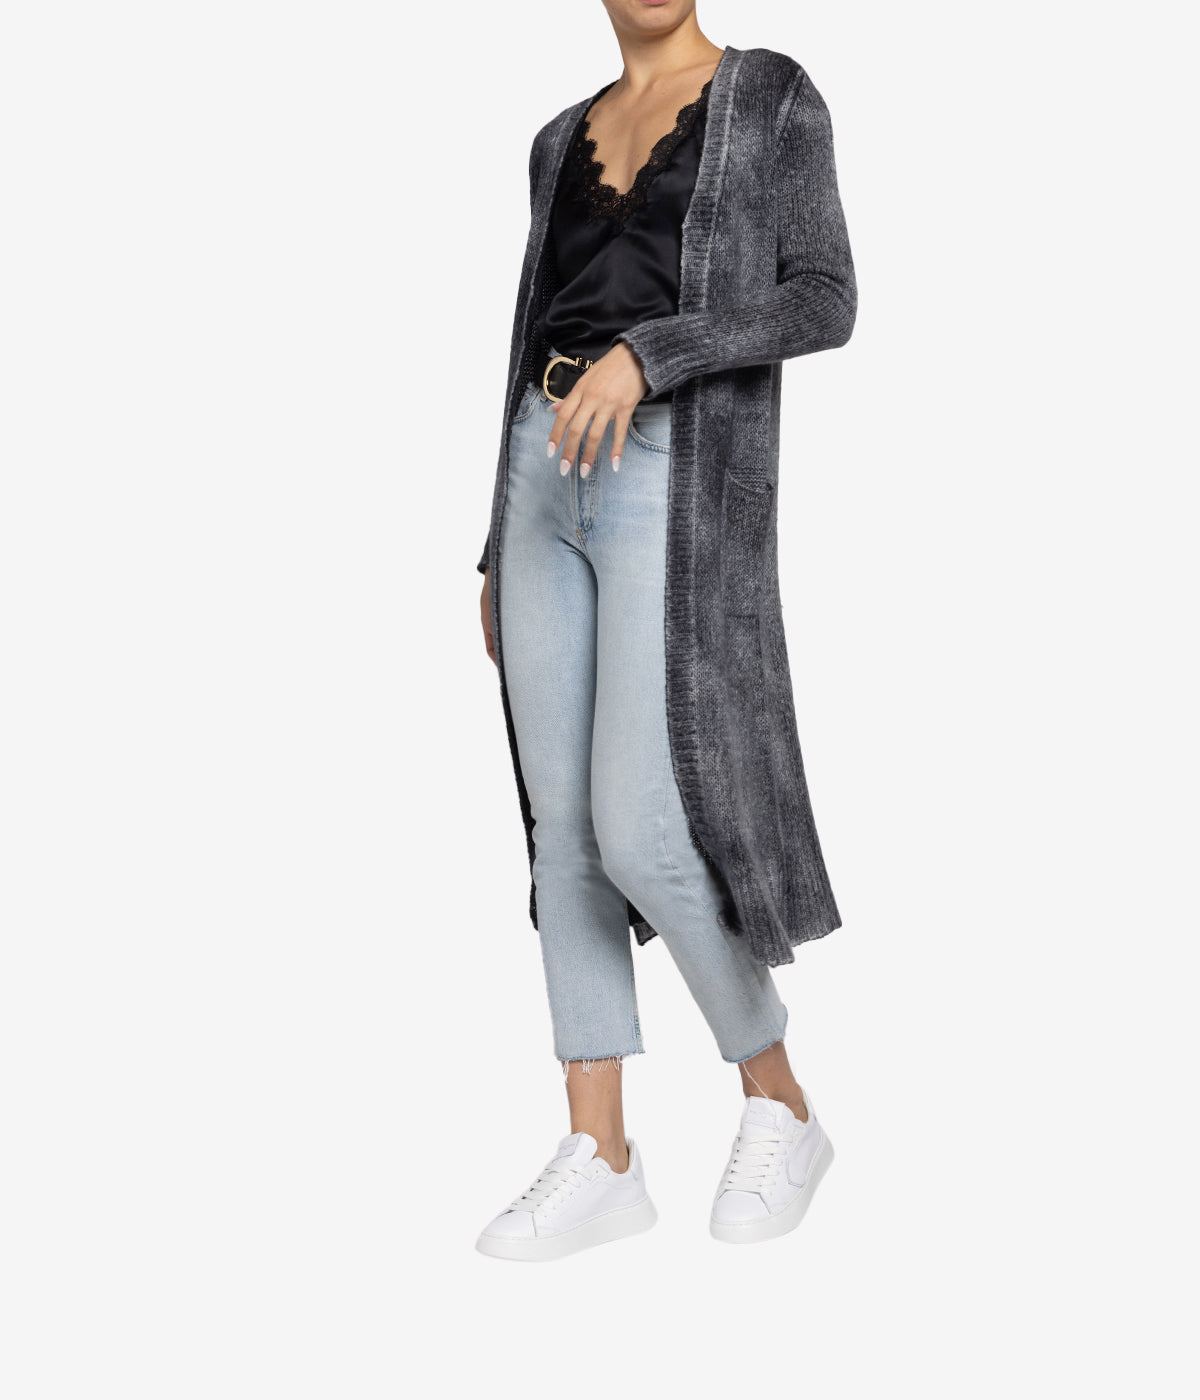 Long Cardigan with Pockets in Husky